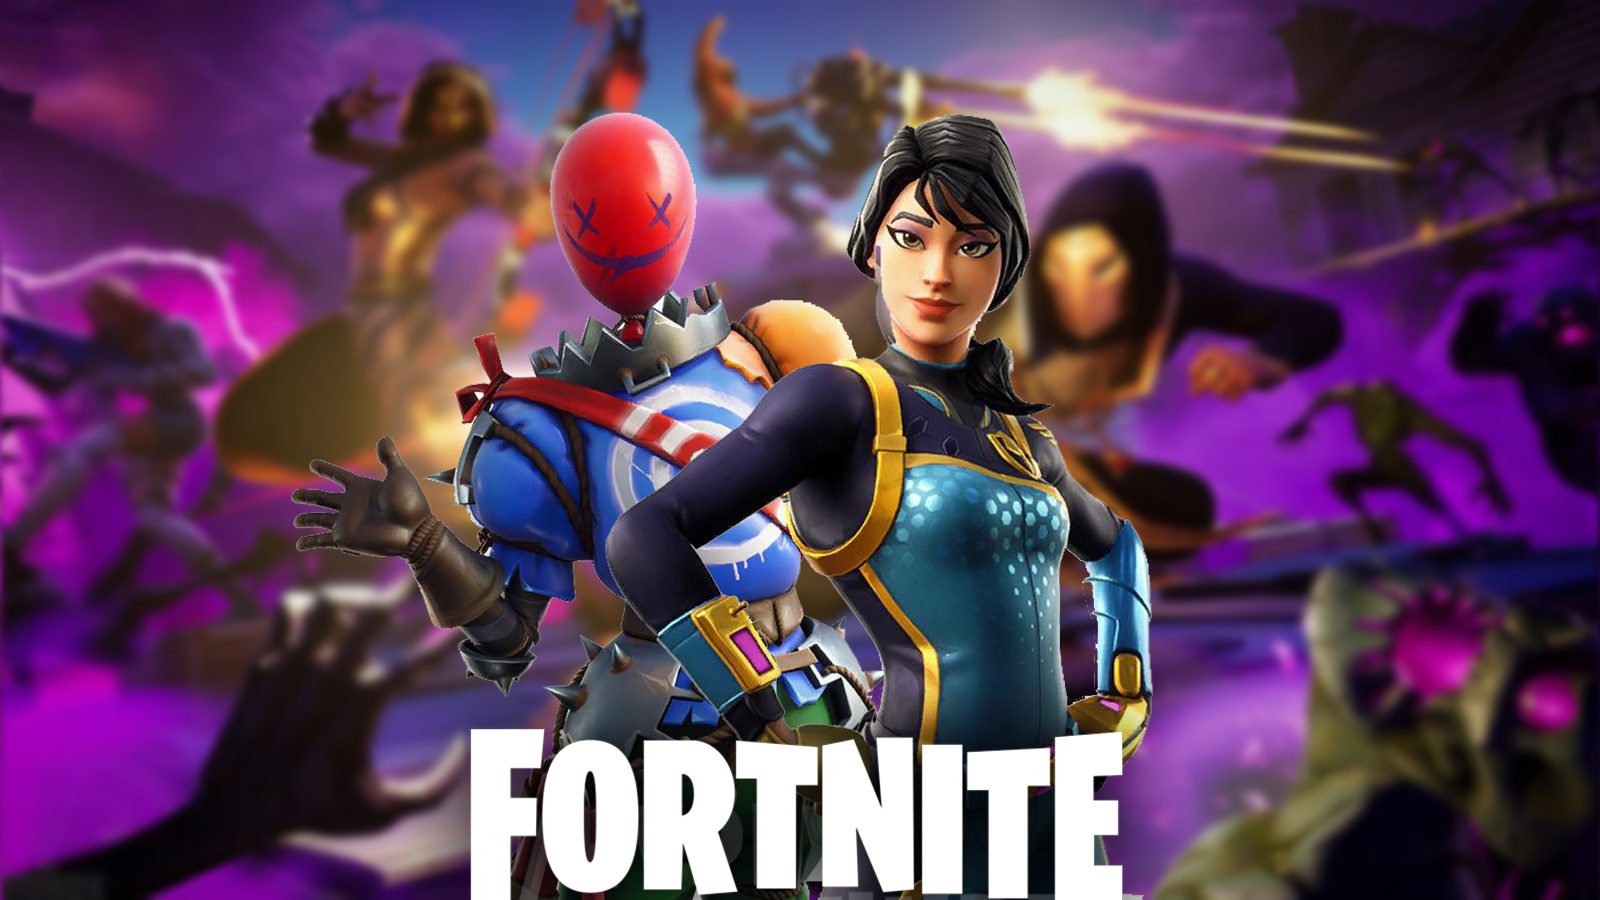 Leaked Fortnite skins and cosmetic items from v9.20 update 